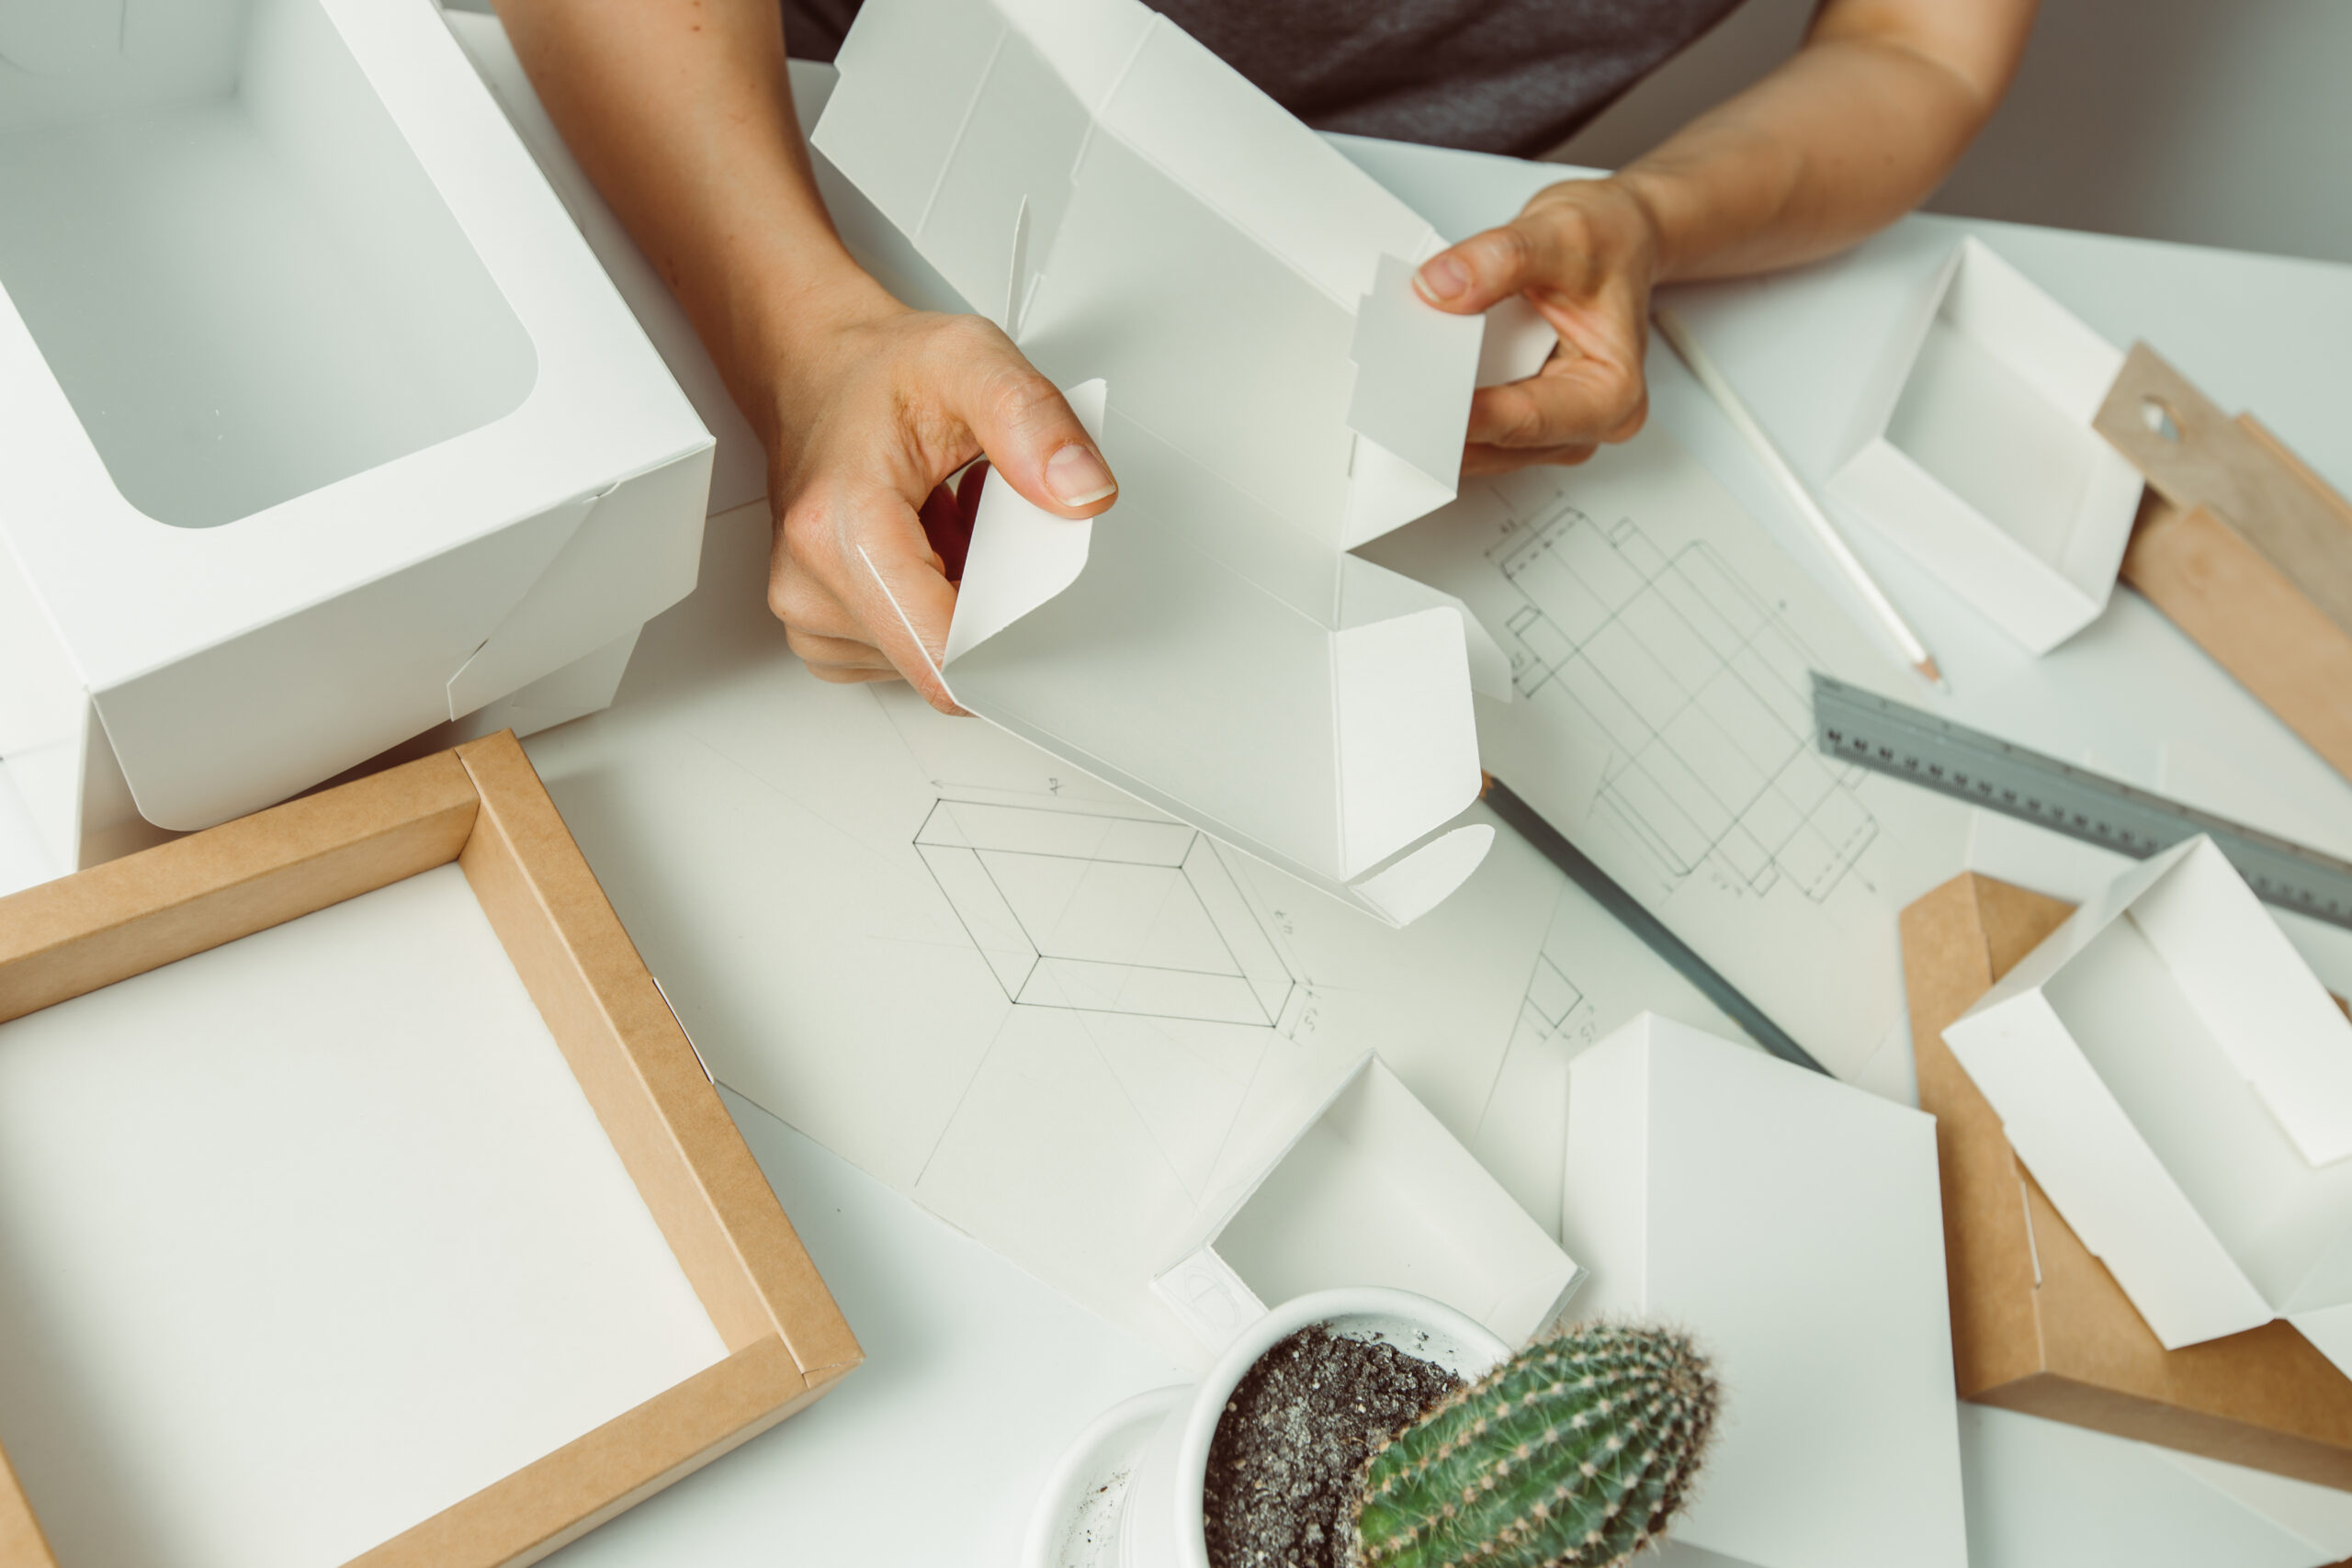 The designer creates a mockup for crafting of cardboard ecological packaging. Development a model paper box for branding.